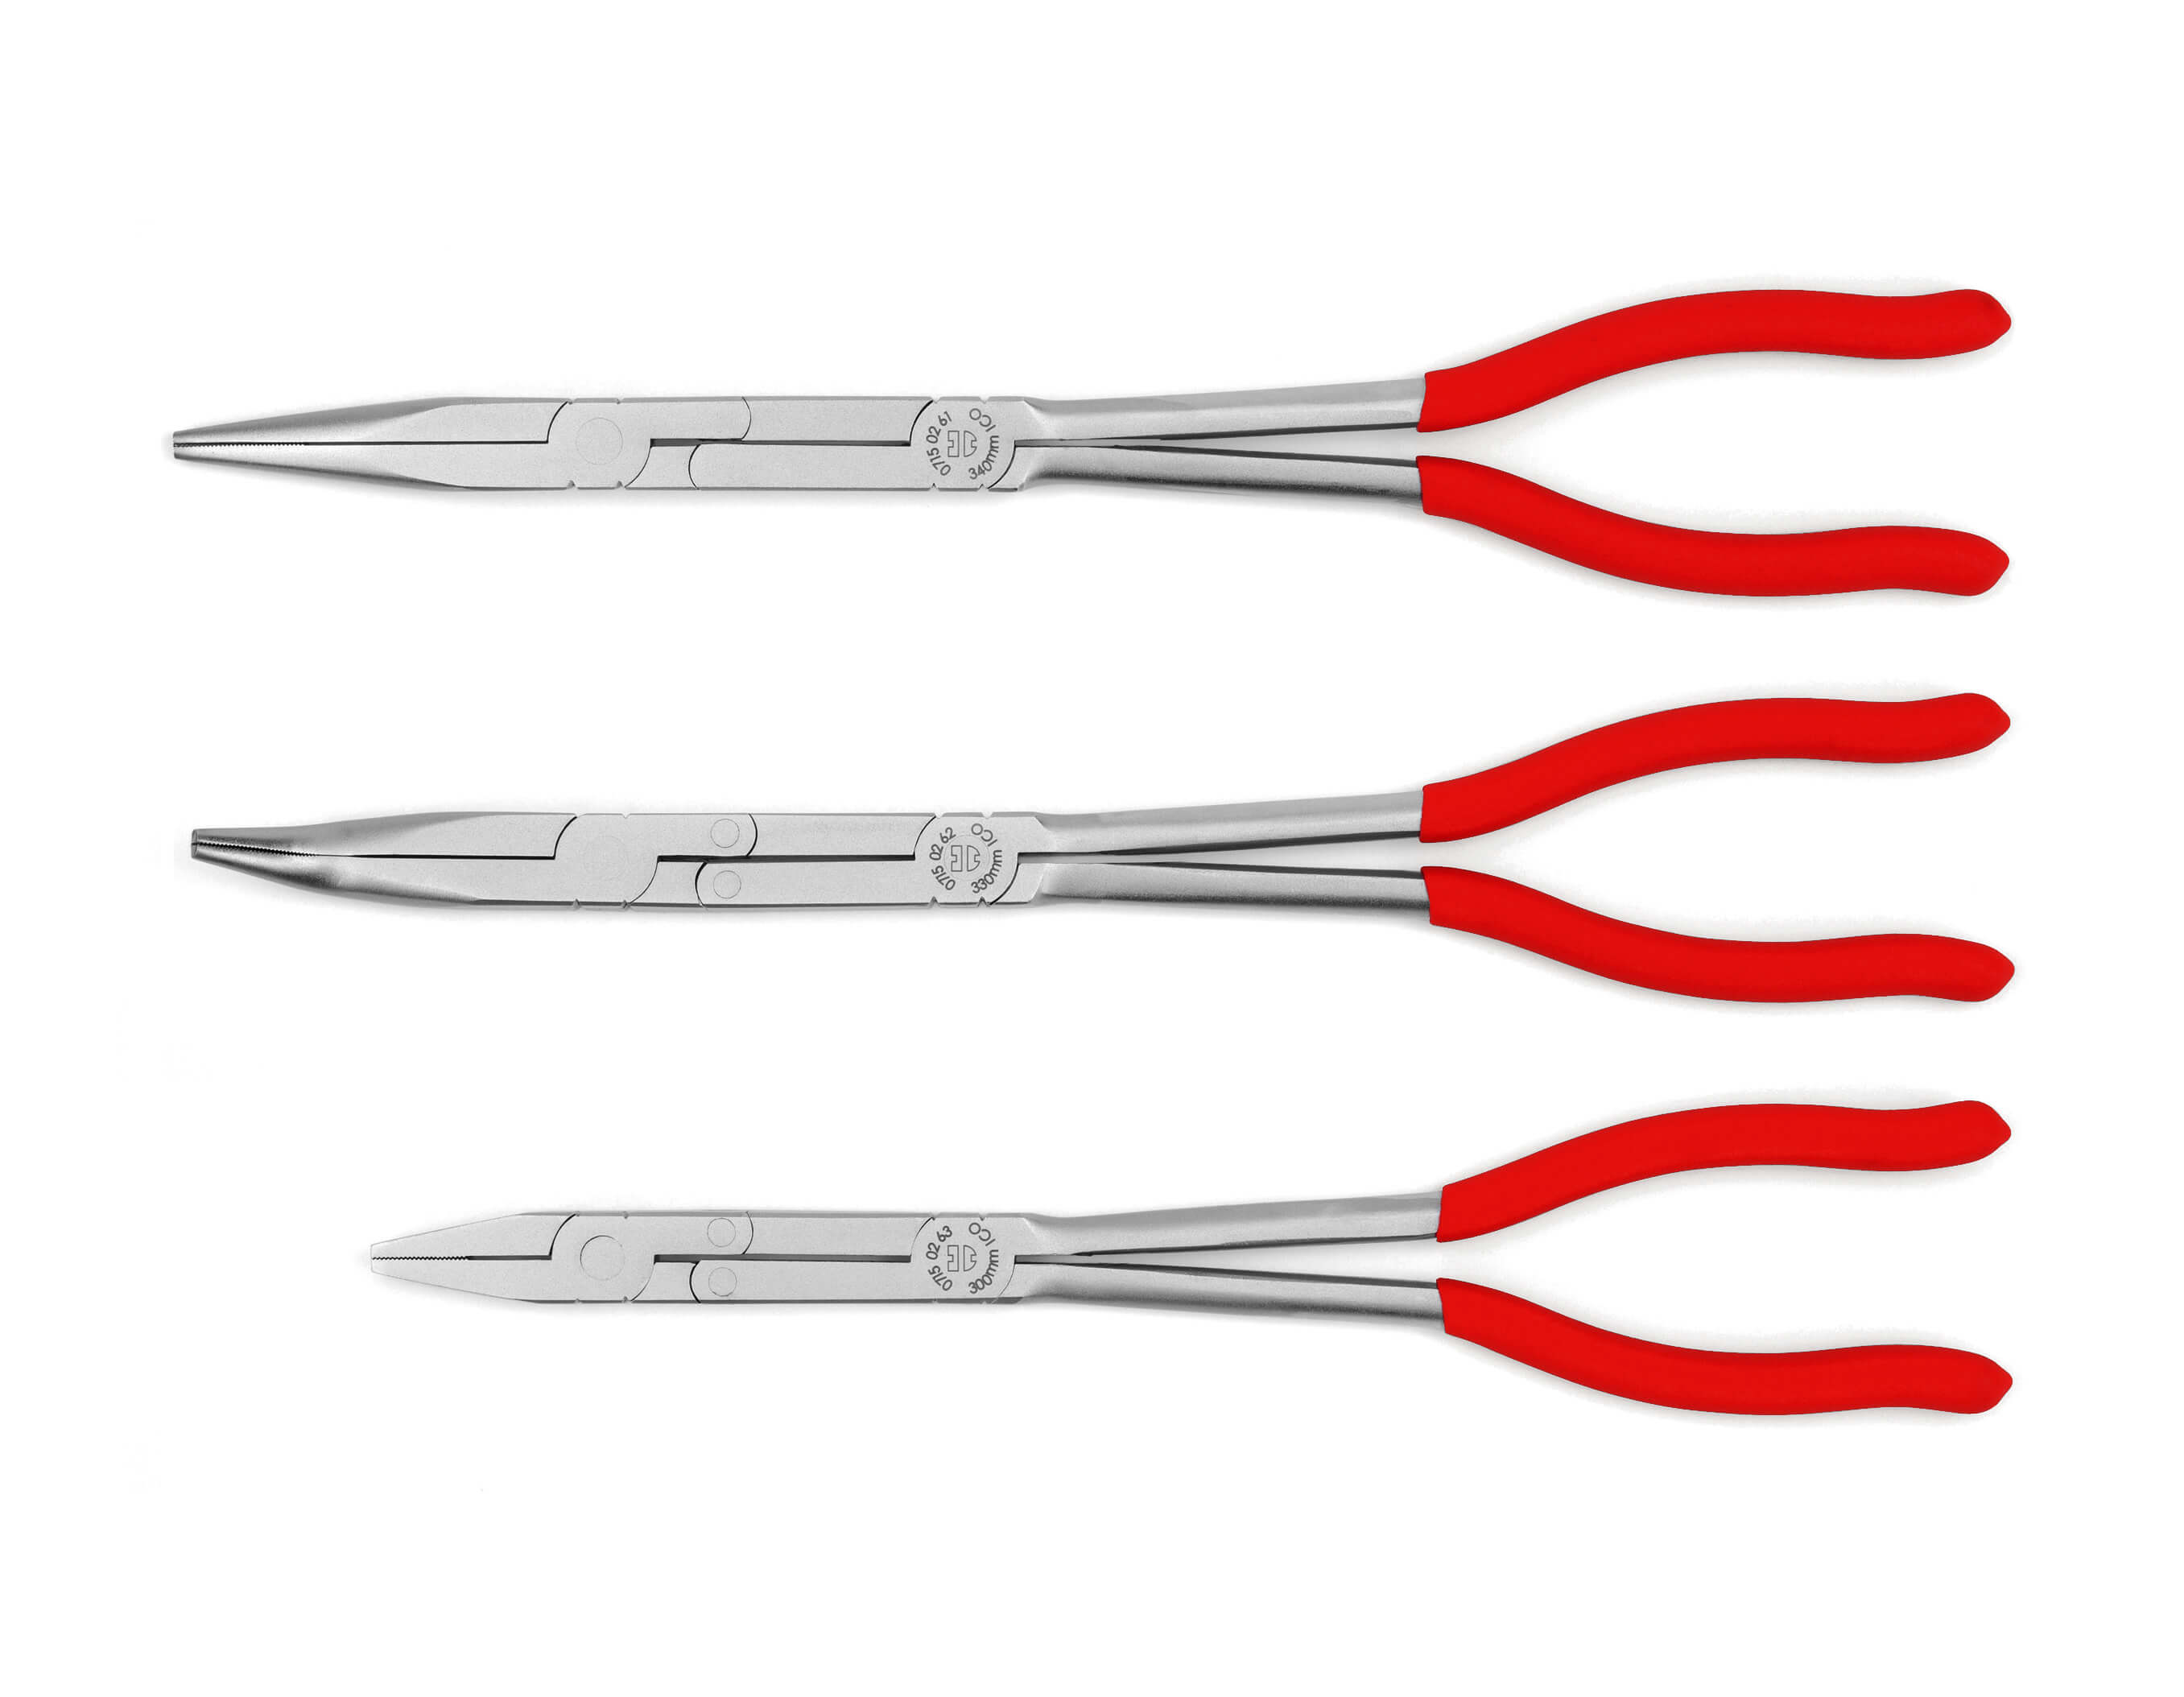 https://pim.wurth.ca/Product/715026-double-jointed-plier-set-a-wurth_b.jpg